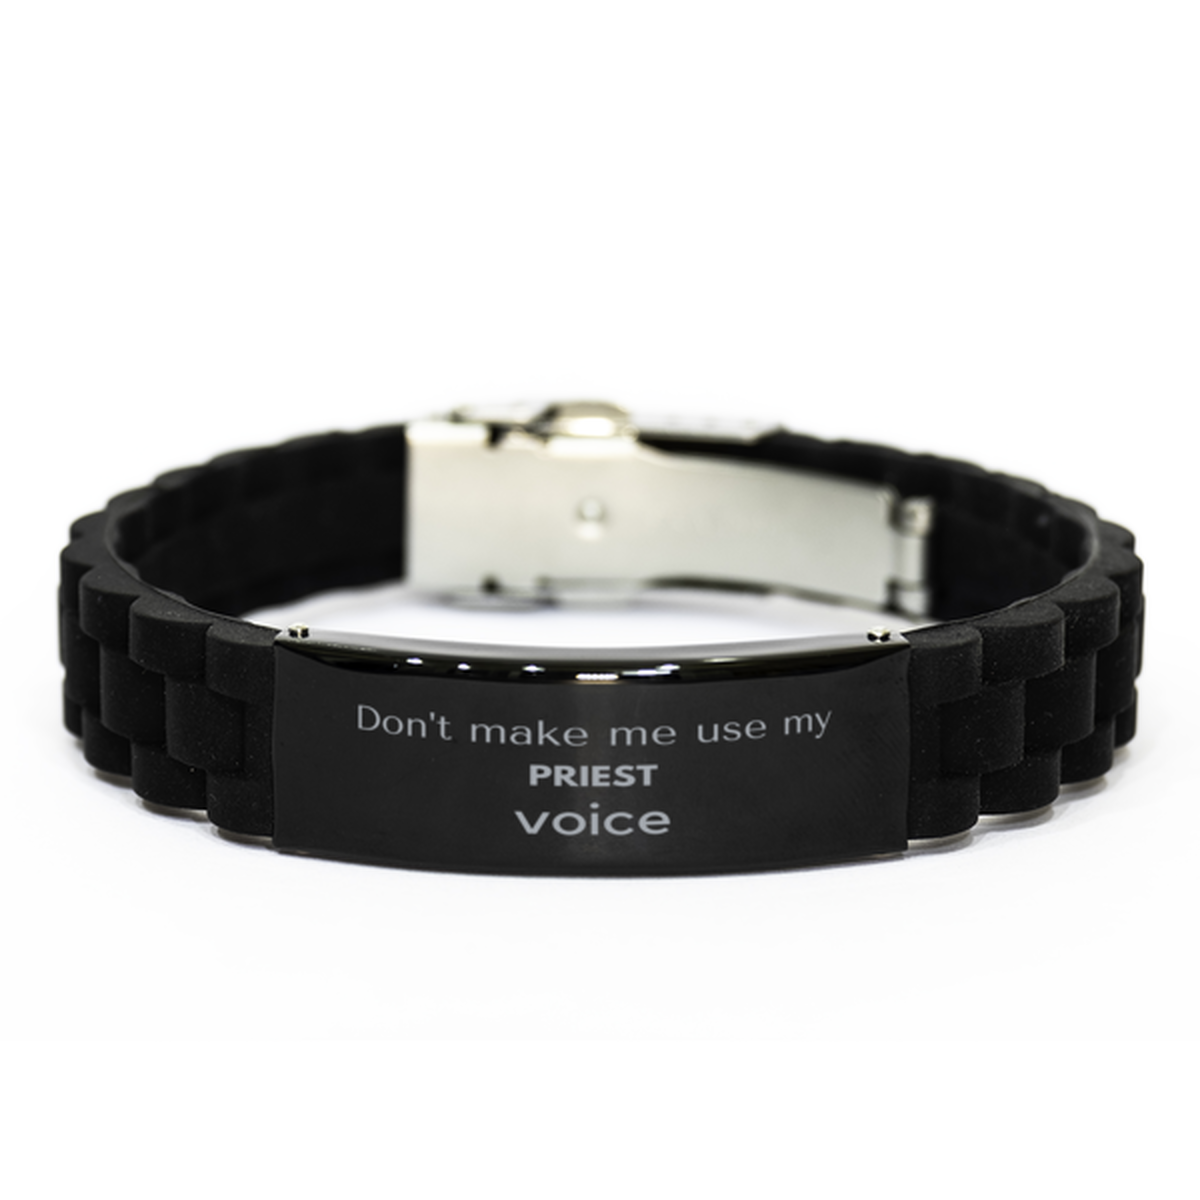 Don't make me use my Priest voice, Sarcasm Priest Gifts, Christmas Priest Black Glidelock Clasp Bracelet Birthday Unique Gifts For Priest Coworkers, Men, Women, Colleague, Friends